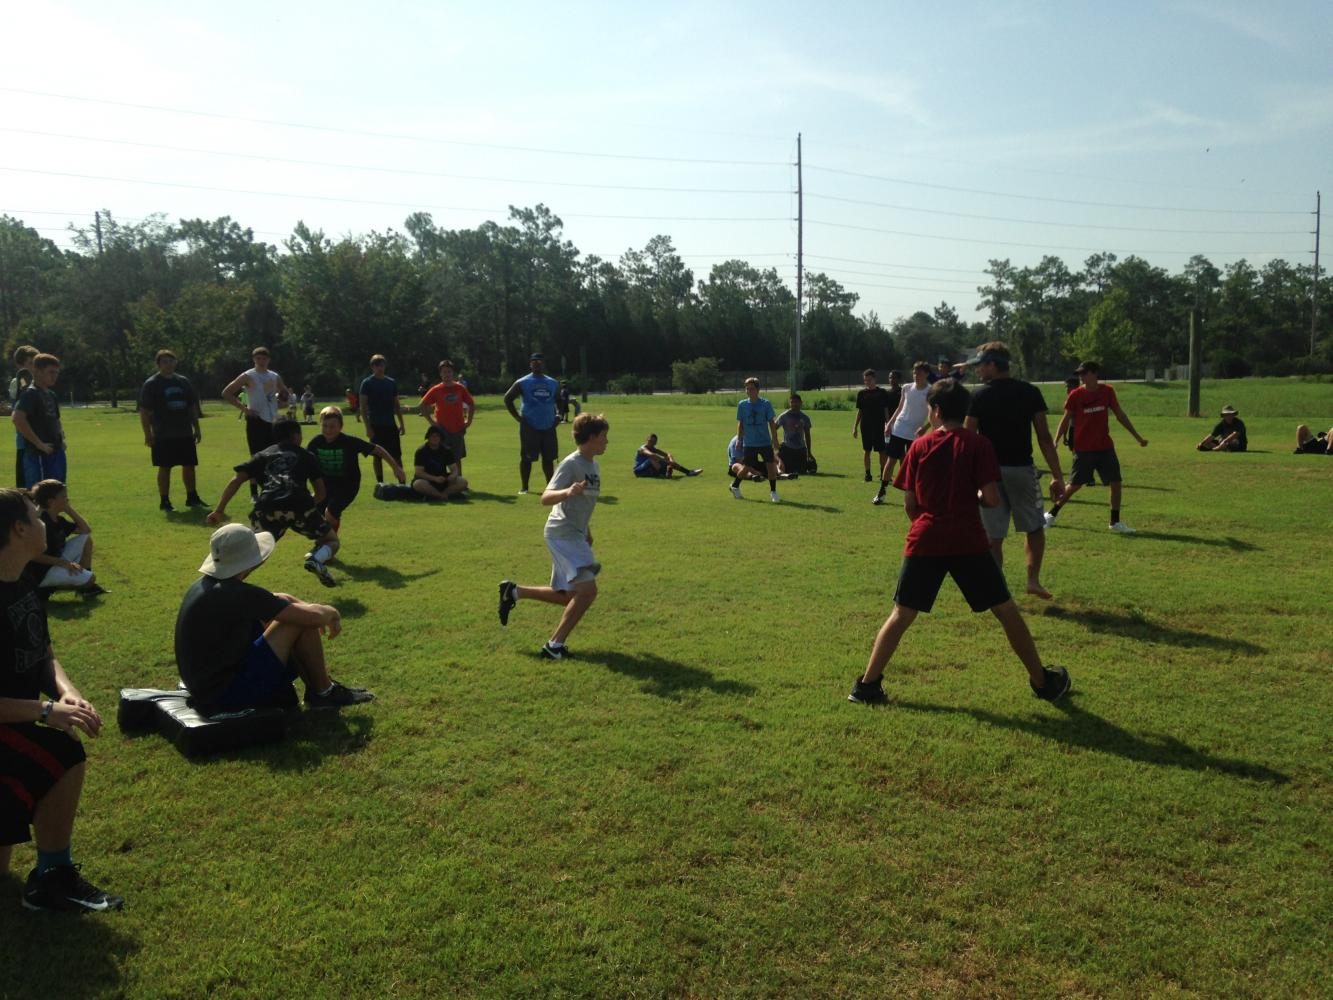 Campers play tag to practice tracking the ball carrier. 74 kids attended the camp.